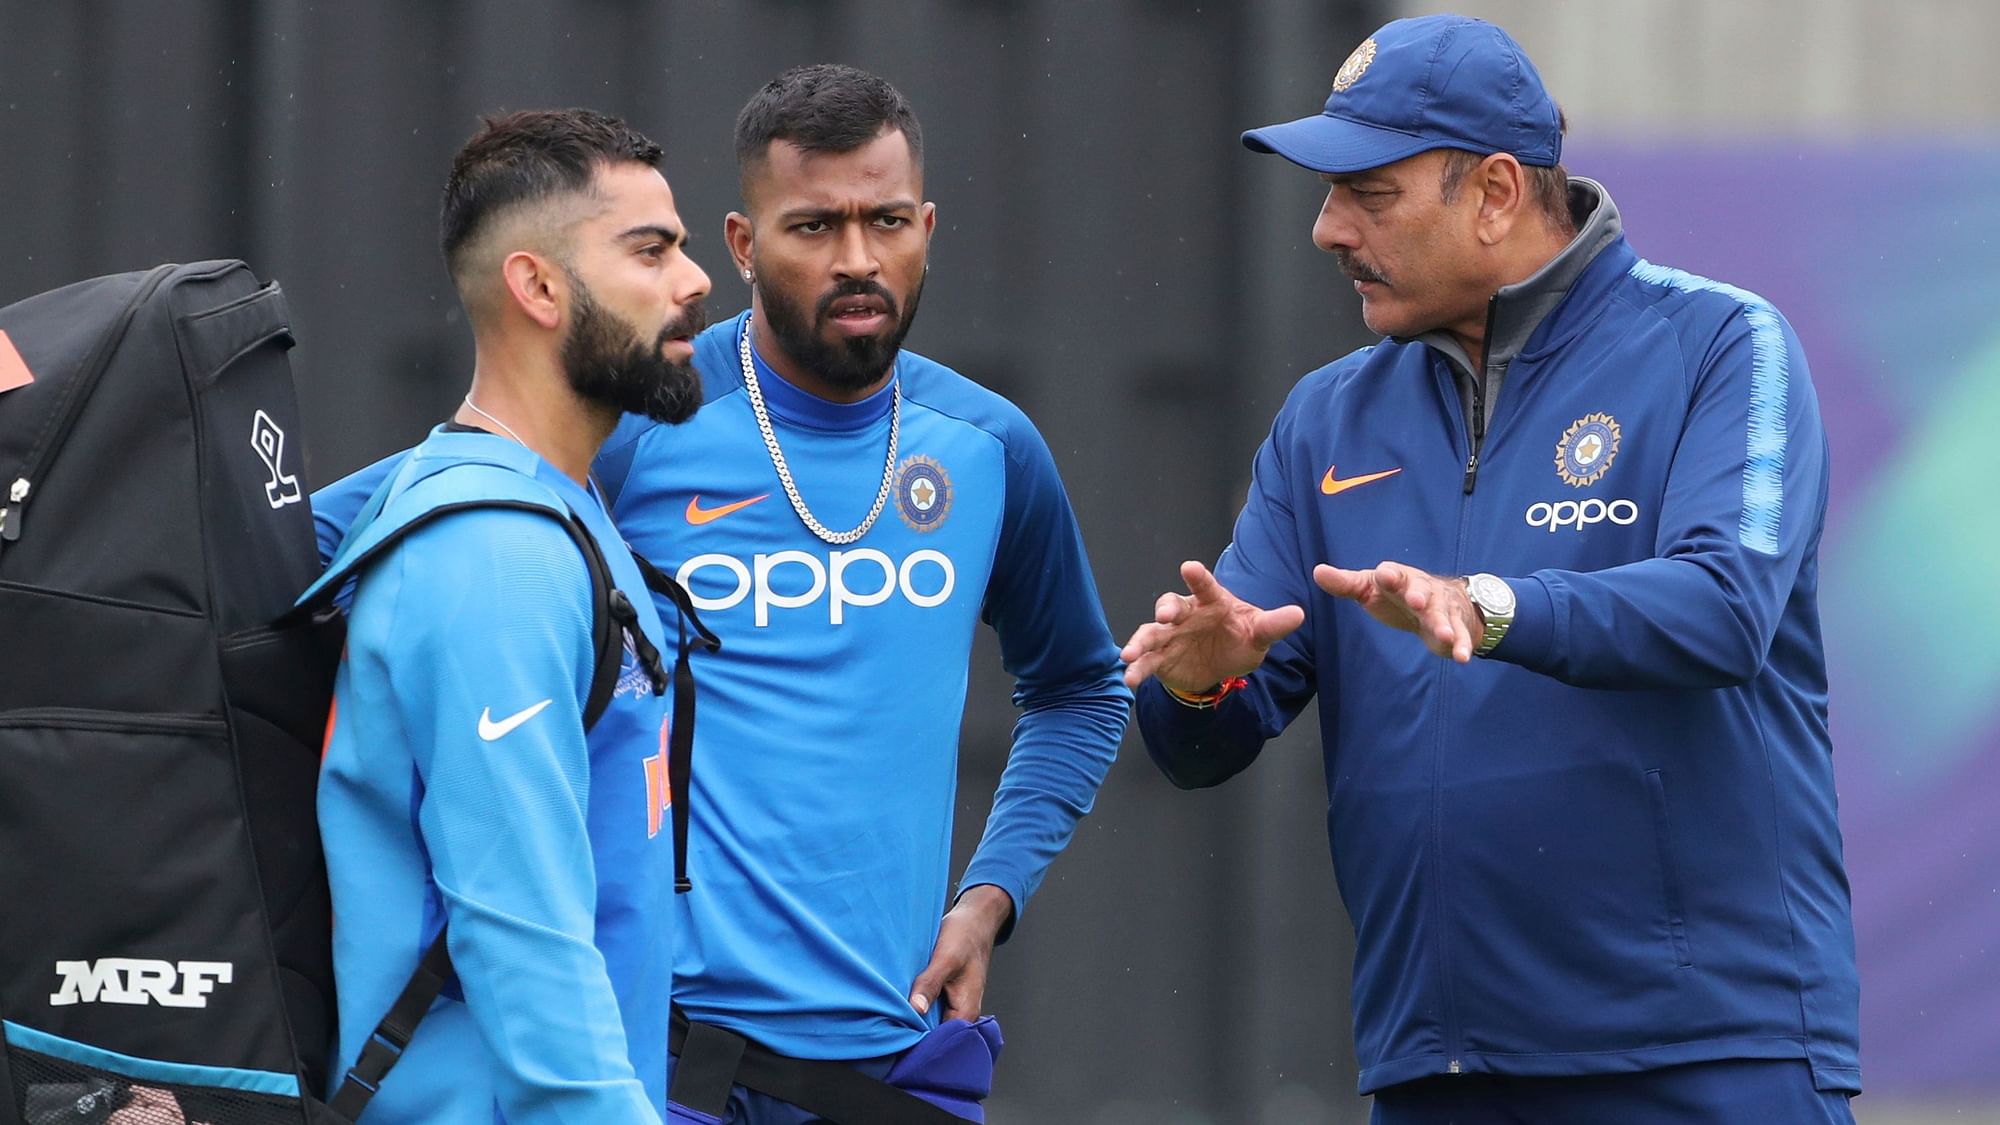 India are playing Sri Lanka on Sri Lanka in their final group game of the 2019 ICC World Cup on Saturday.